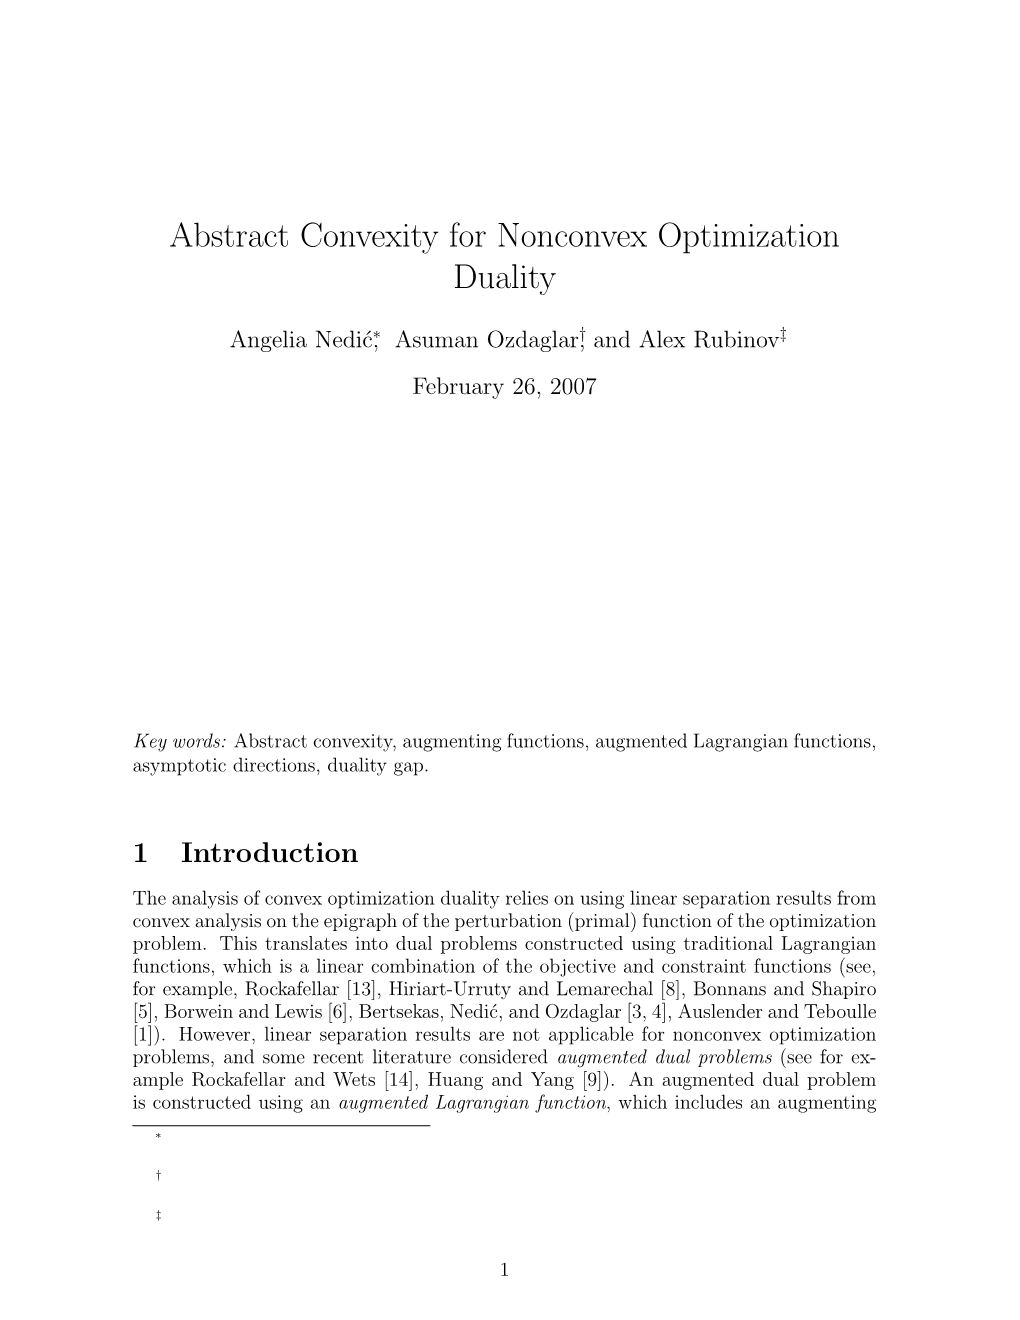 Abstract Convexity for Nonconvex Optimization Duality